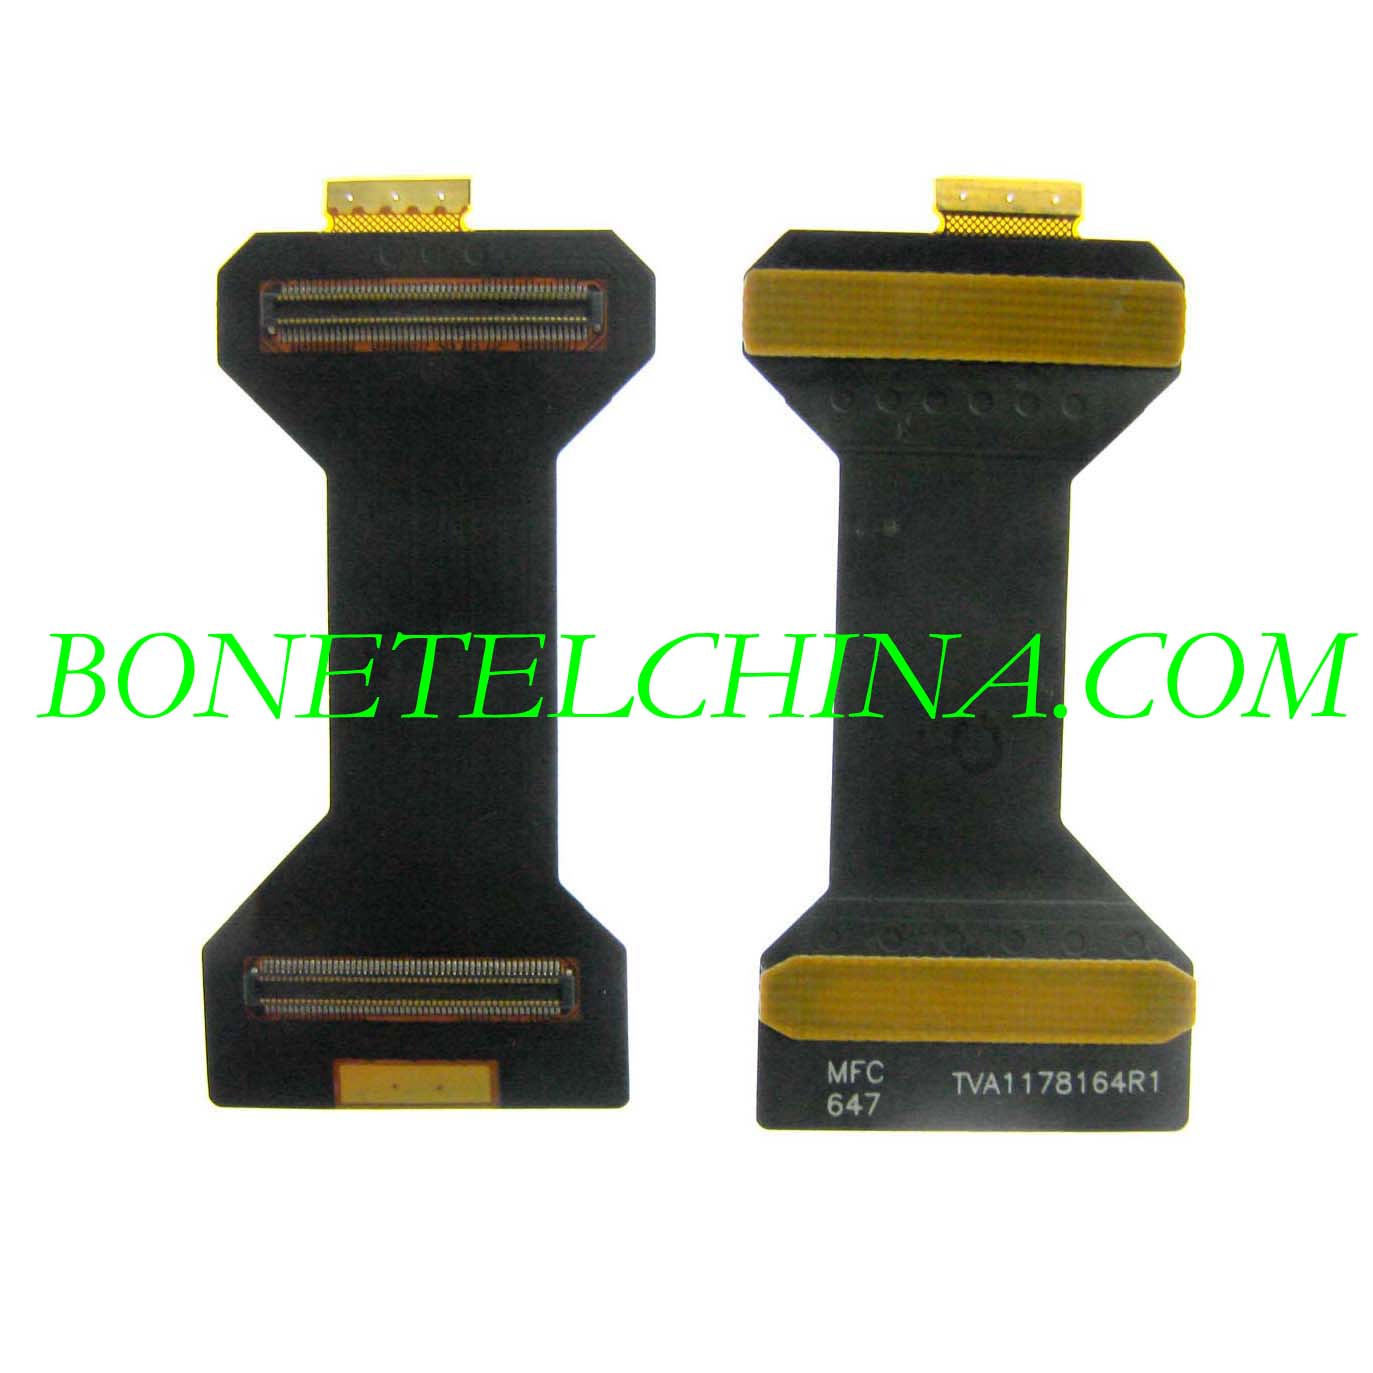 W850 / W830 main board Mobile phone Flex Cables for Sony Ericsson